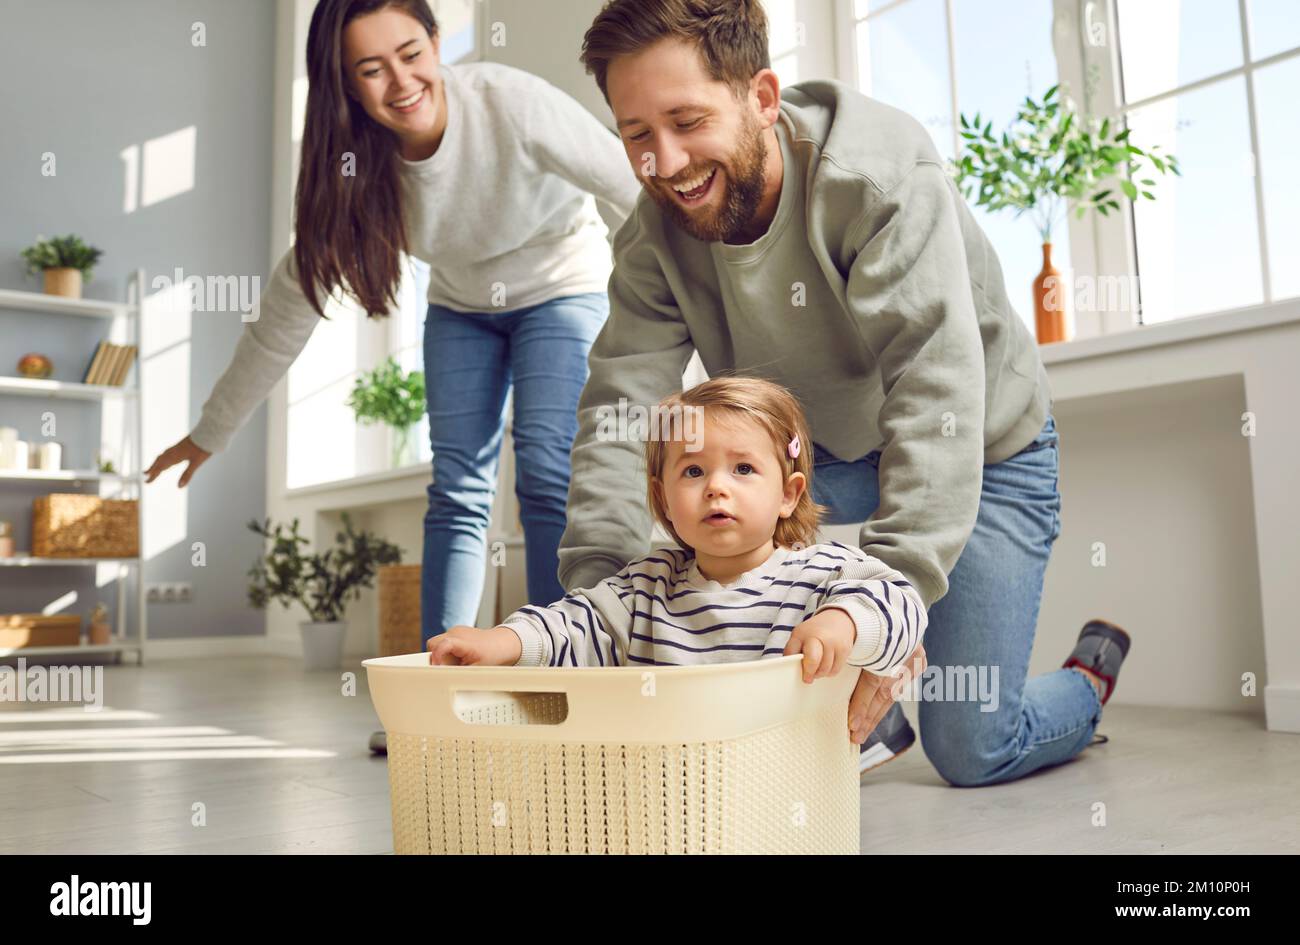 Cheerful young parents are playing with their little daughter, carrying her around house in box. Stock Photo